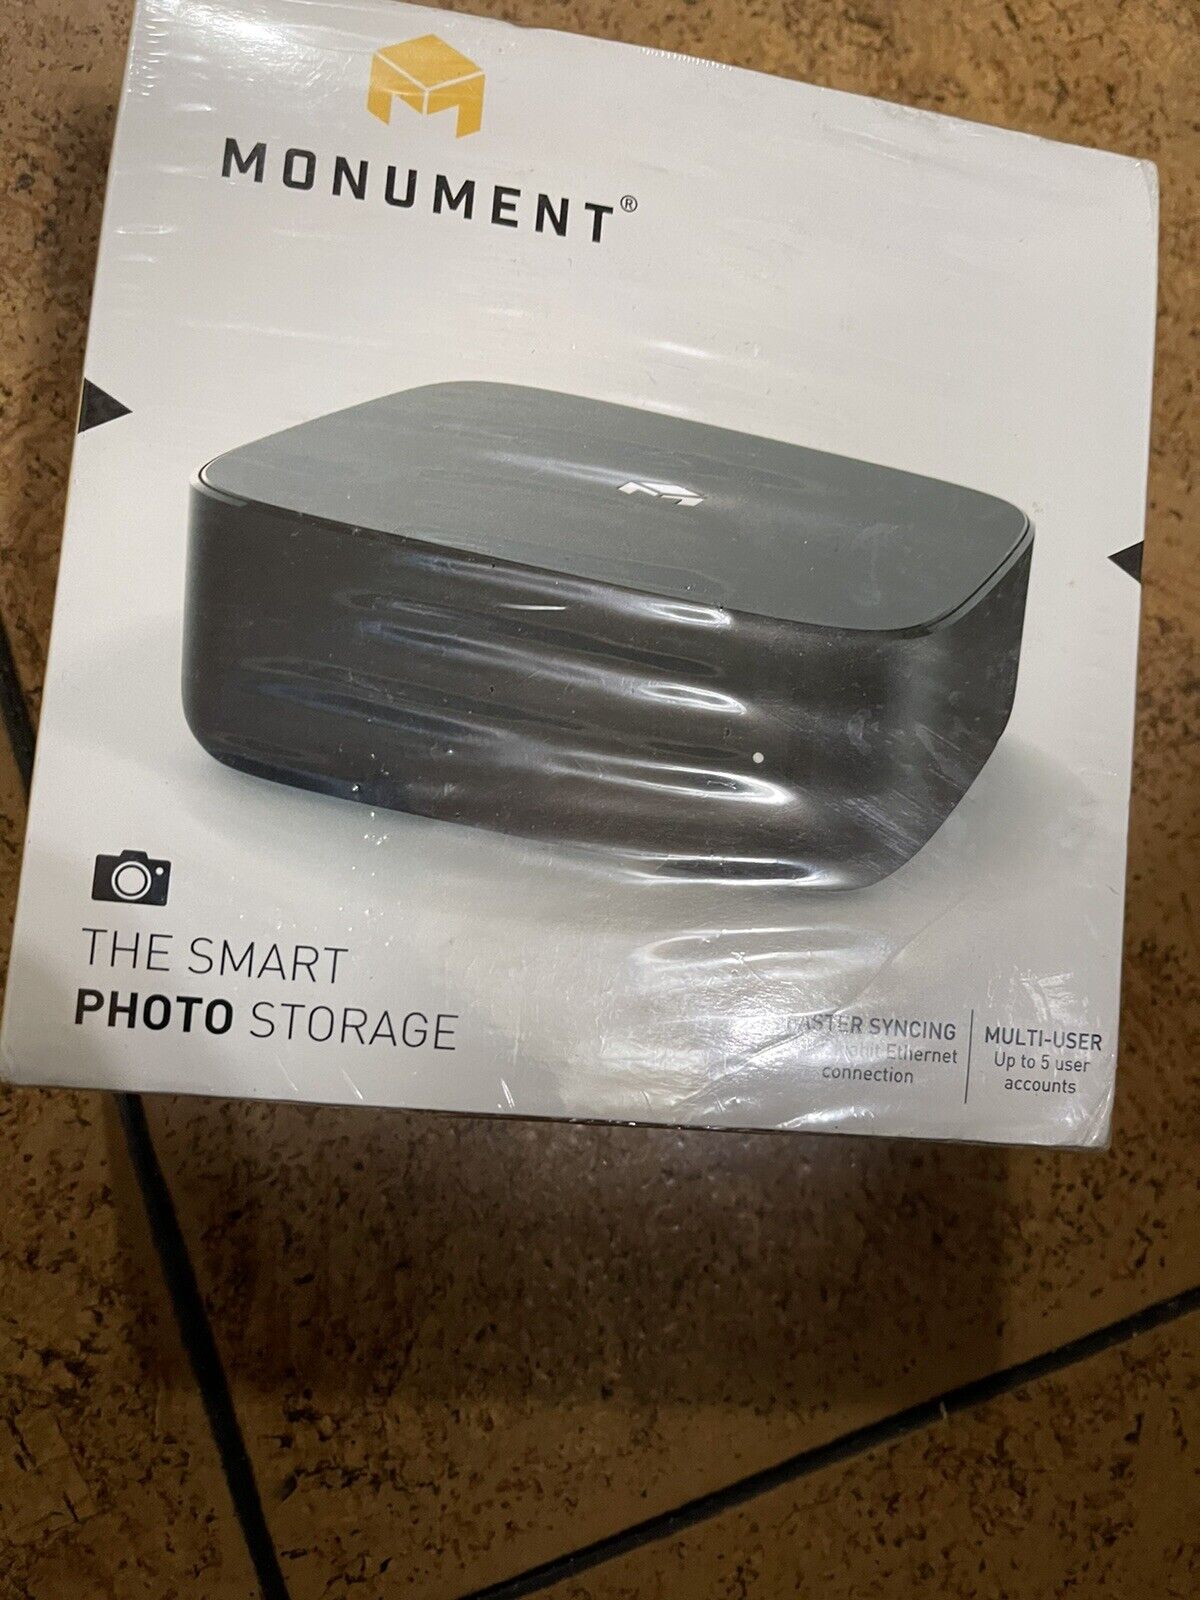 Monument Smart Photo Storage - Model 217A12, Wired or Wrls Ethernet, never used